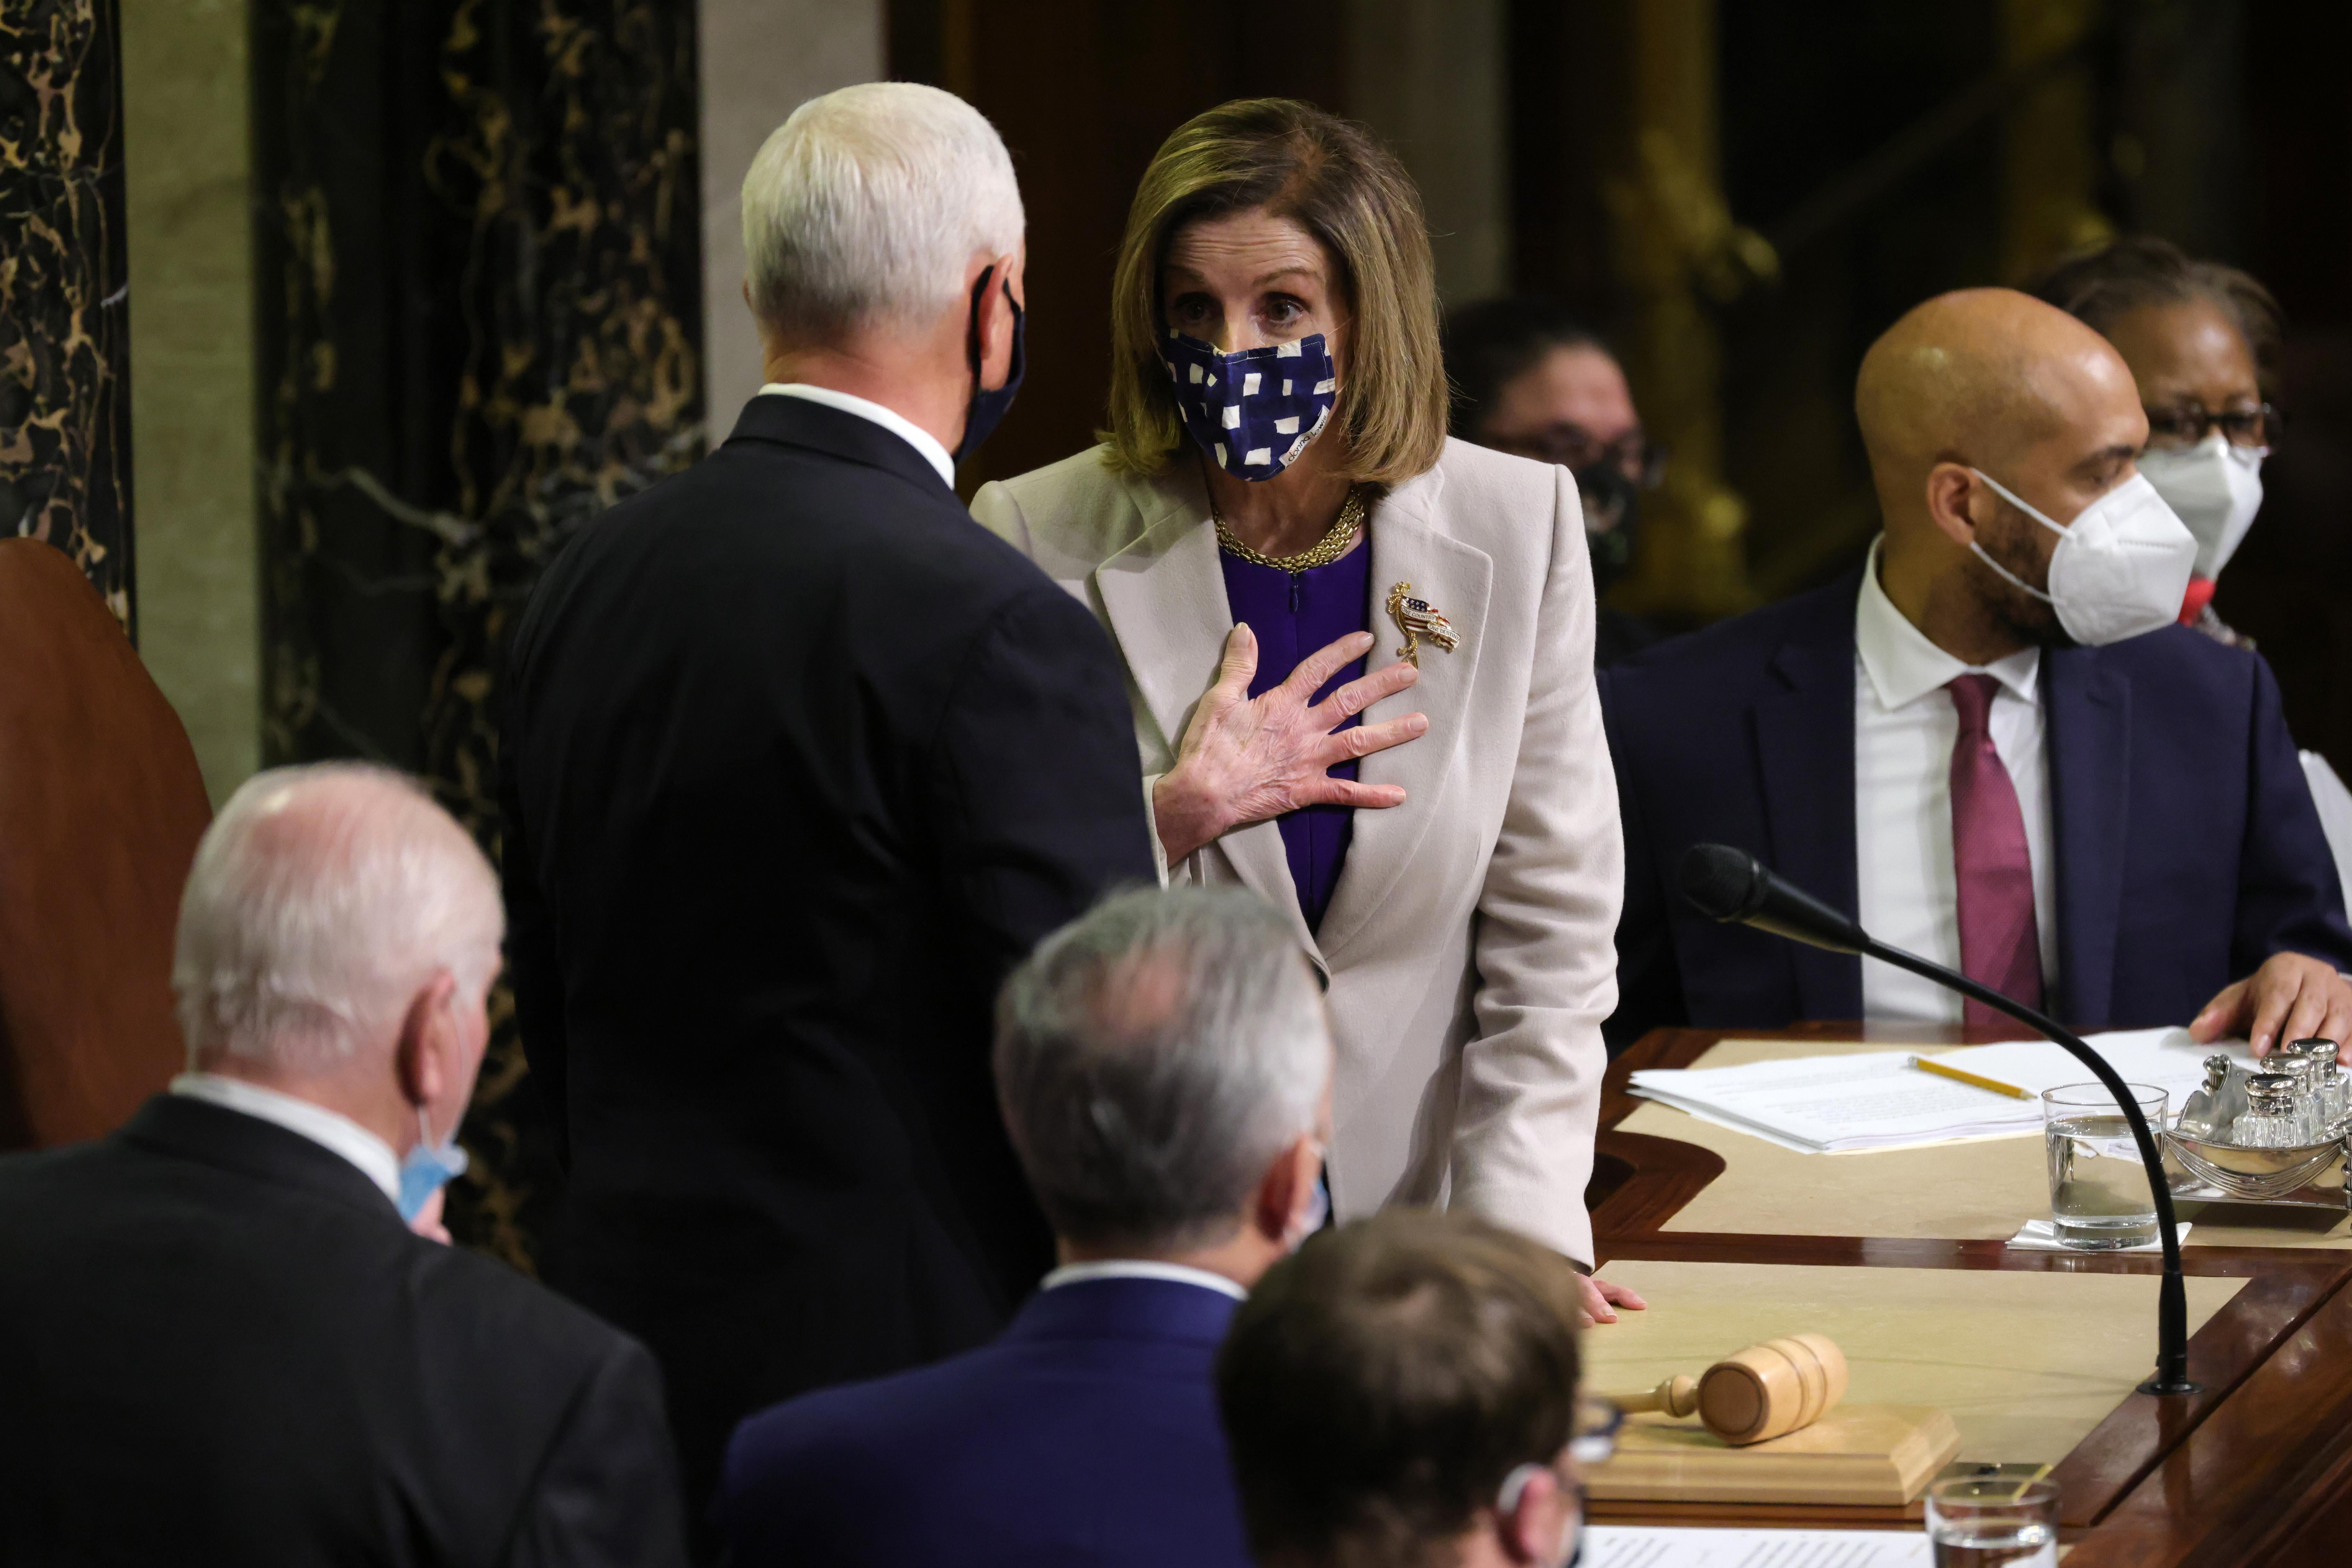 Mike Pence talks to Nancy Pelosi, both standing at the rostrum of the House chamber surrounded by other people